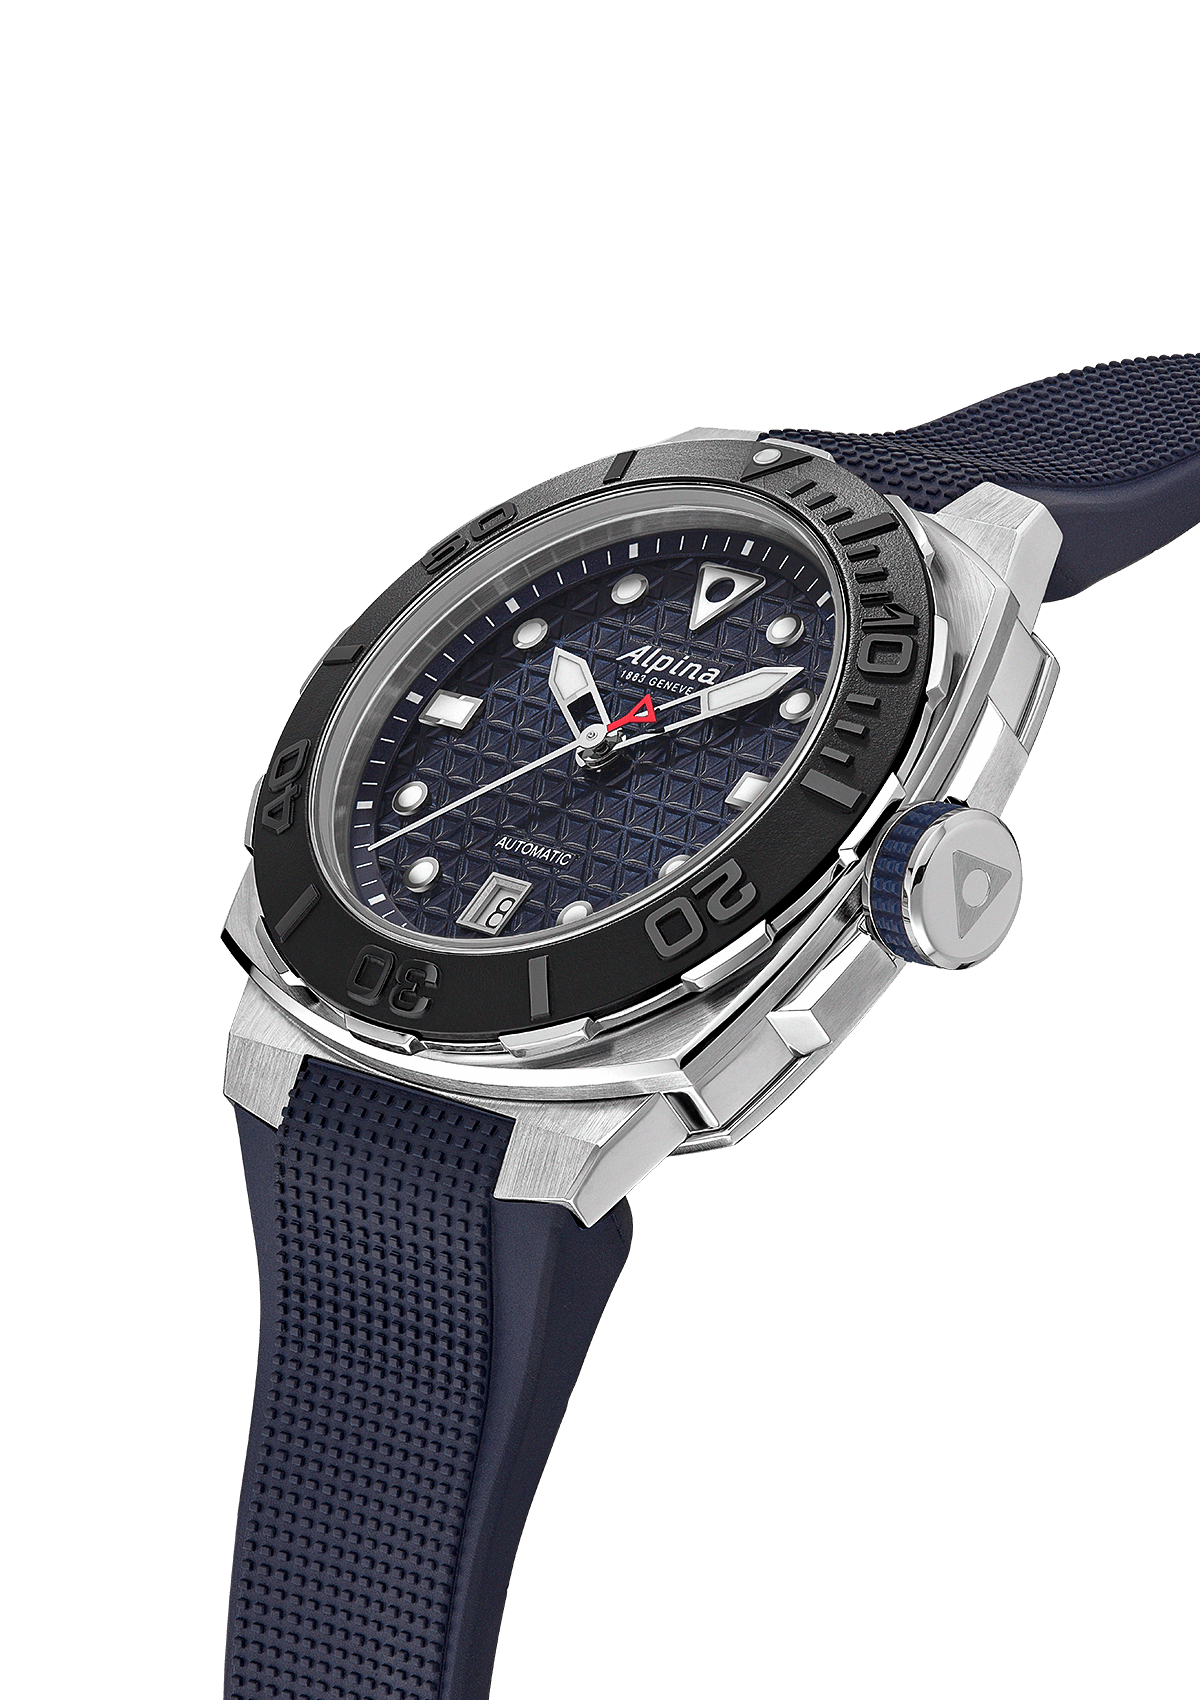 Seastrong Diver Extreme Automatic - Alpina Watches